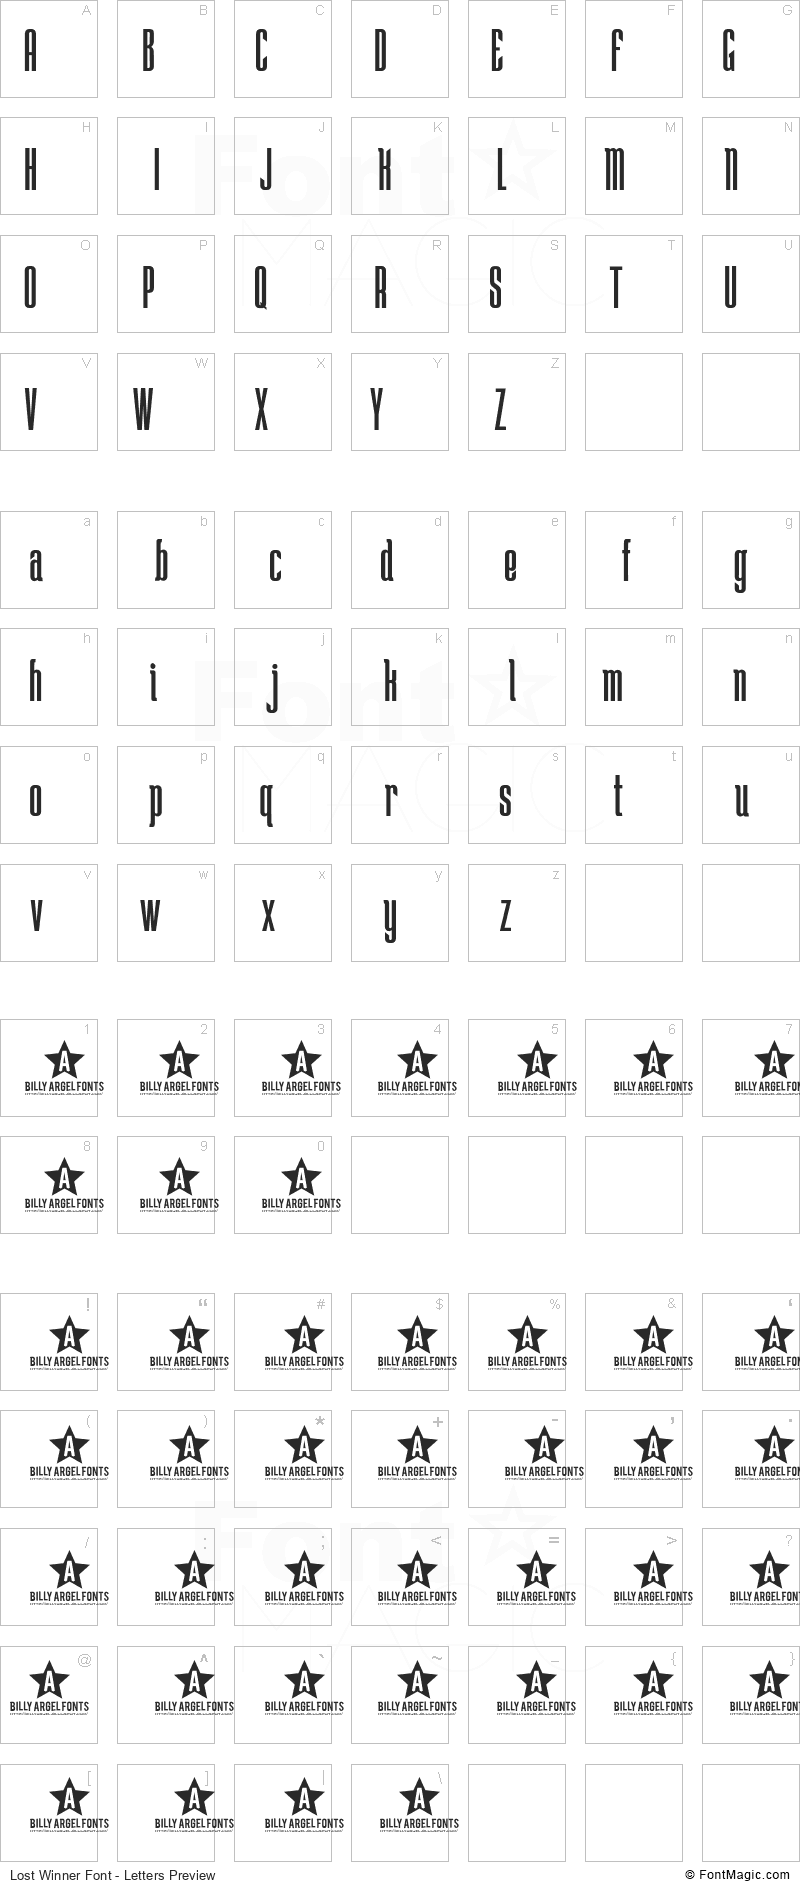 Lost Winner Font - All Latters Preview Chart